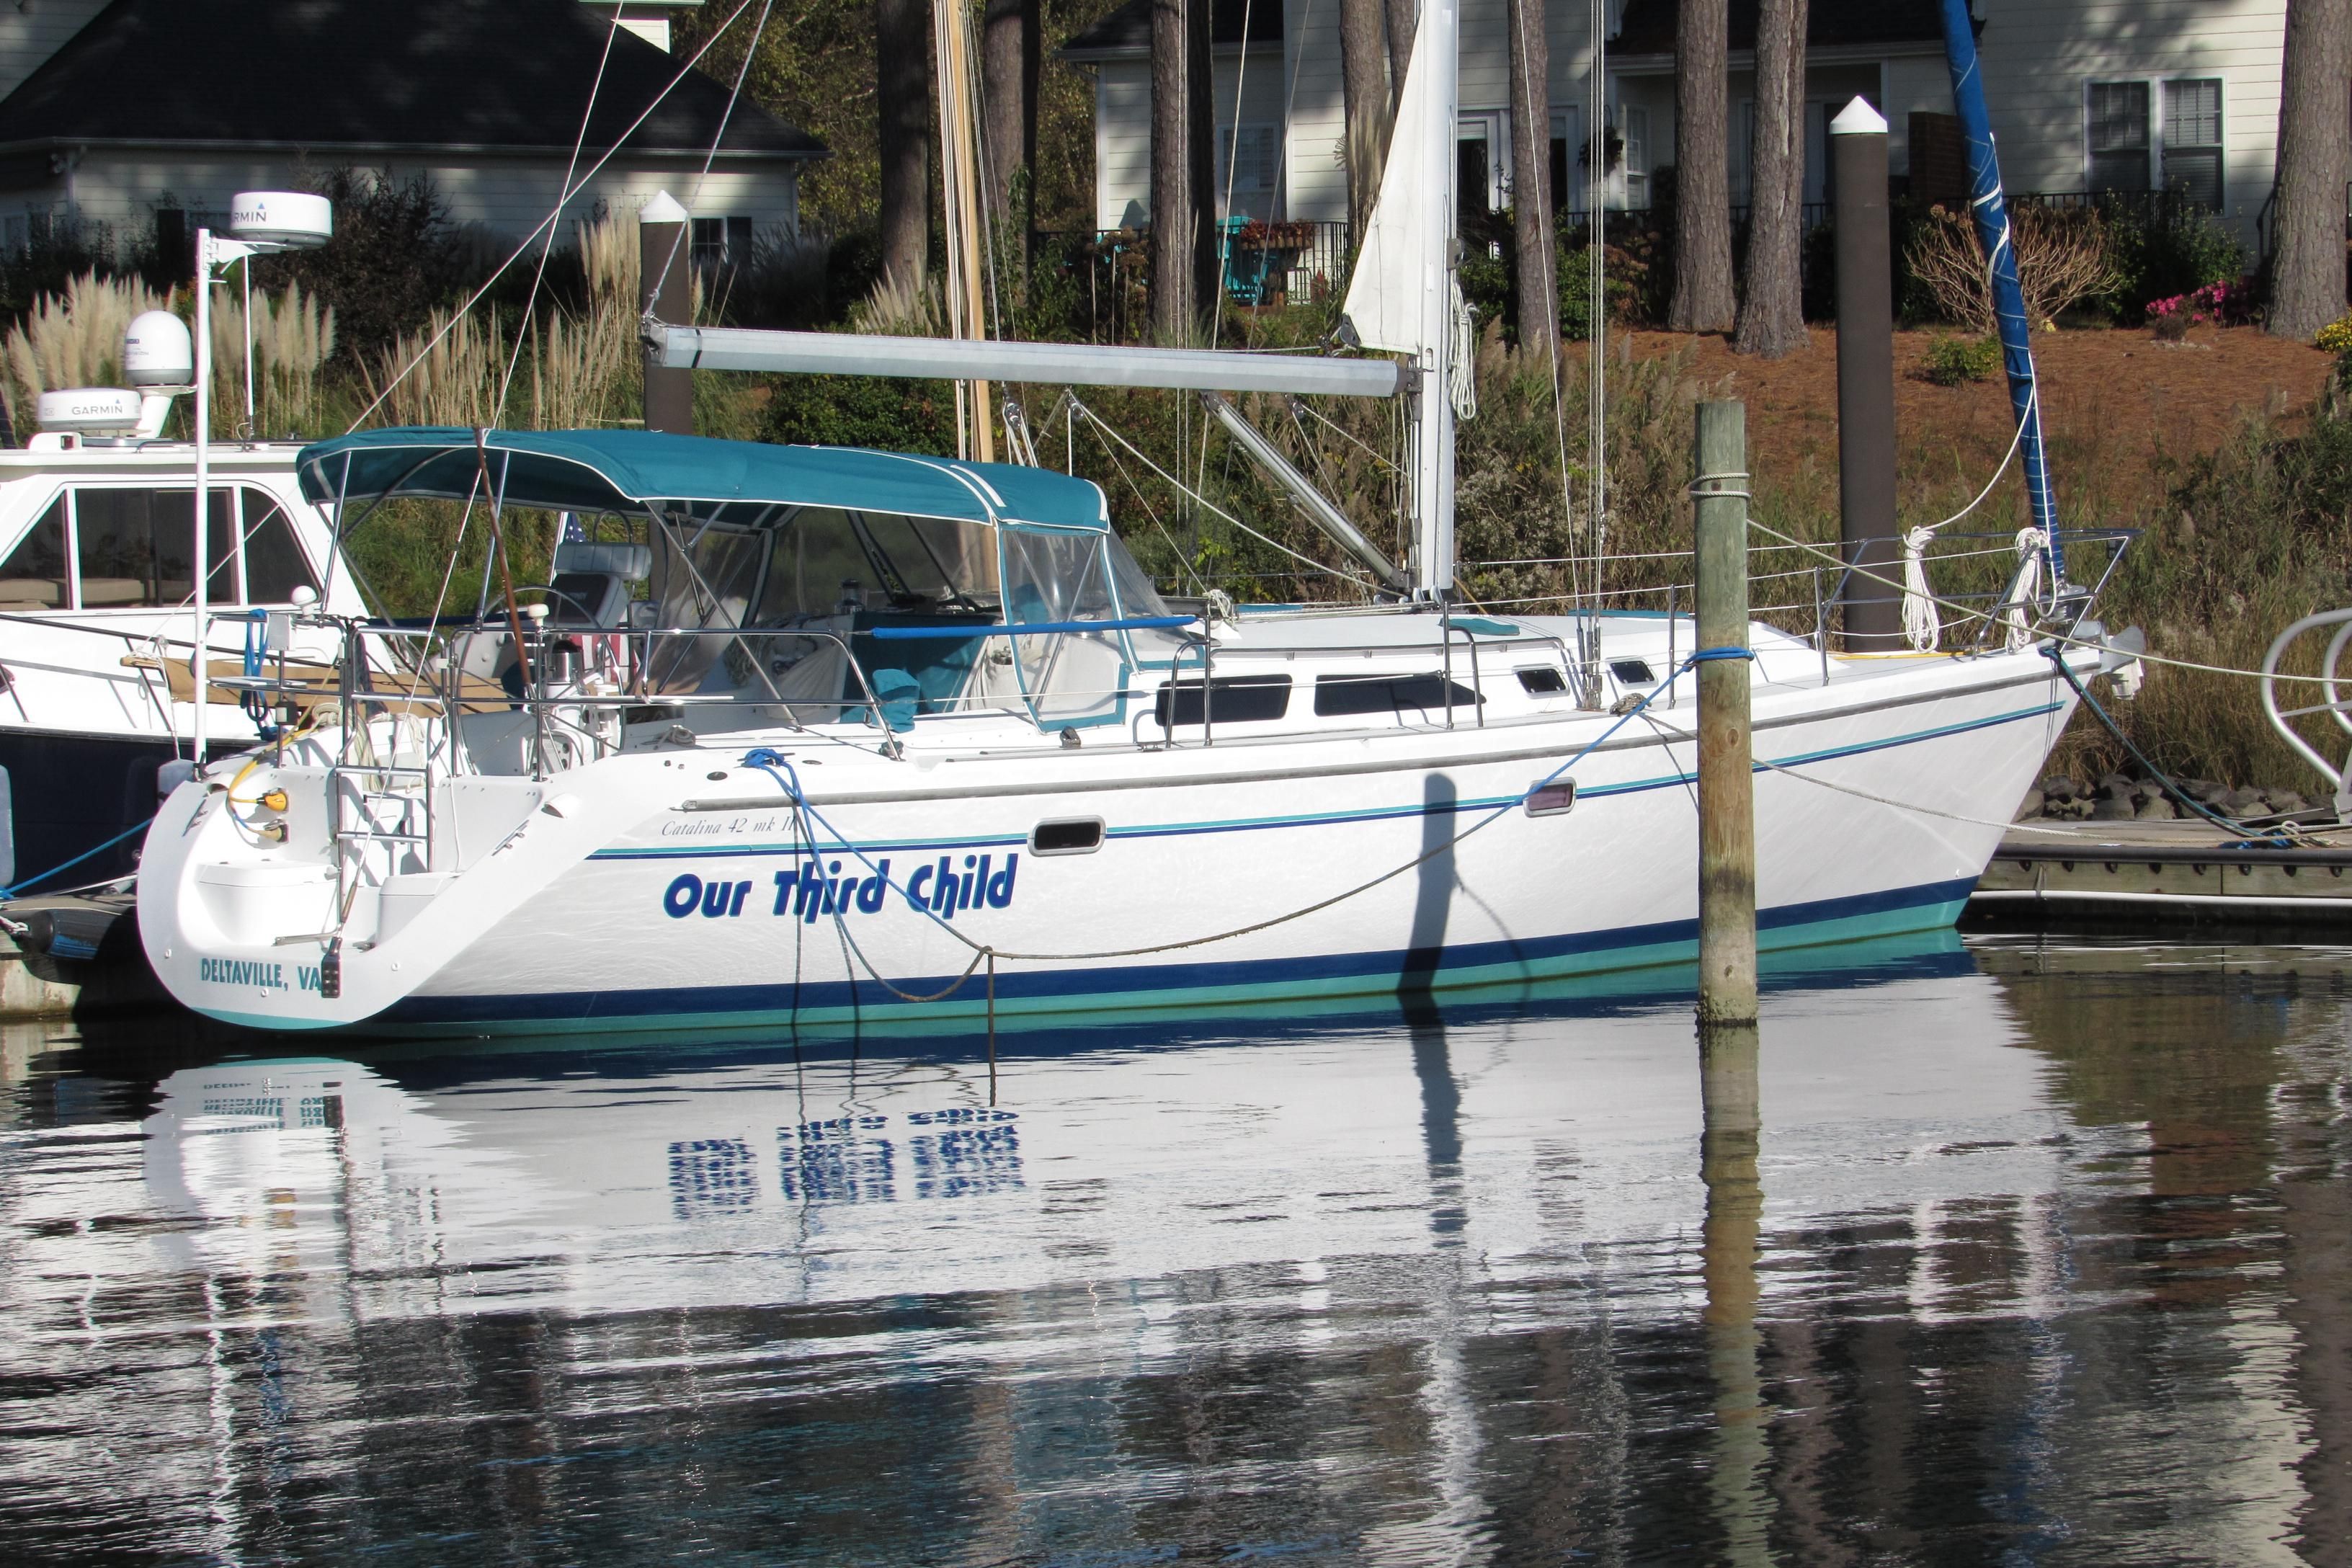 catalina 42 sailboat for sale